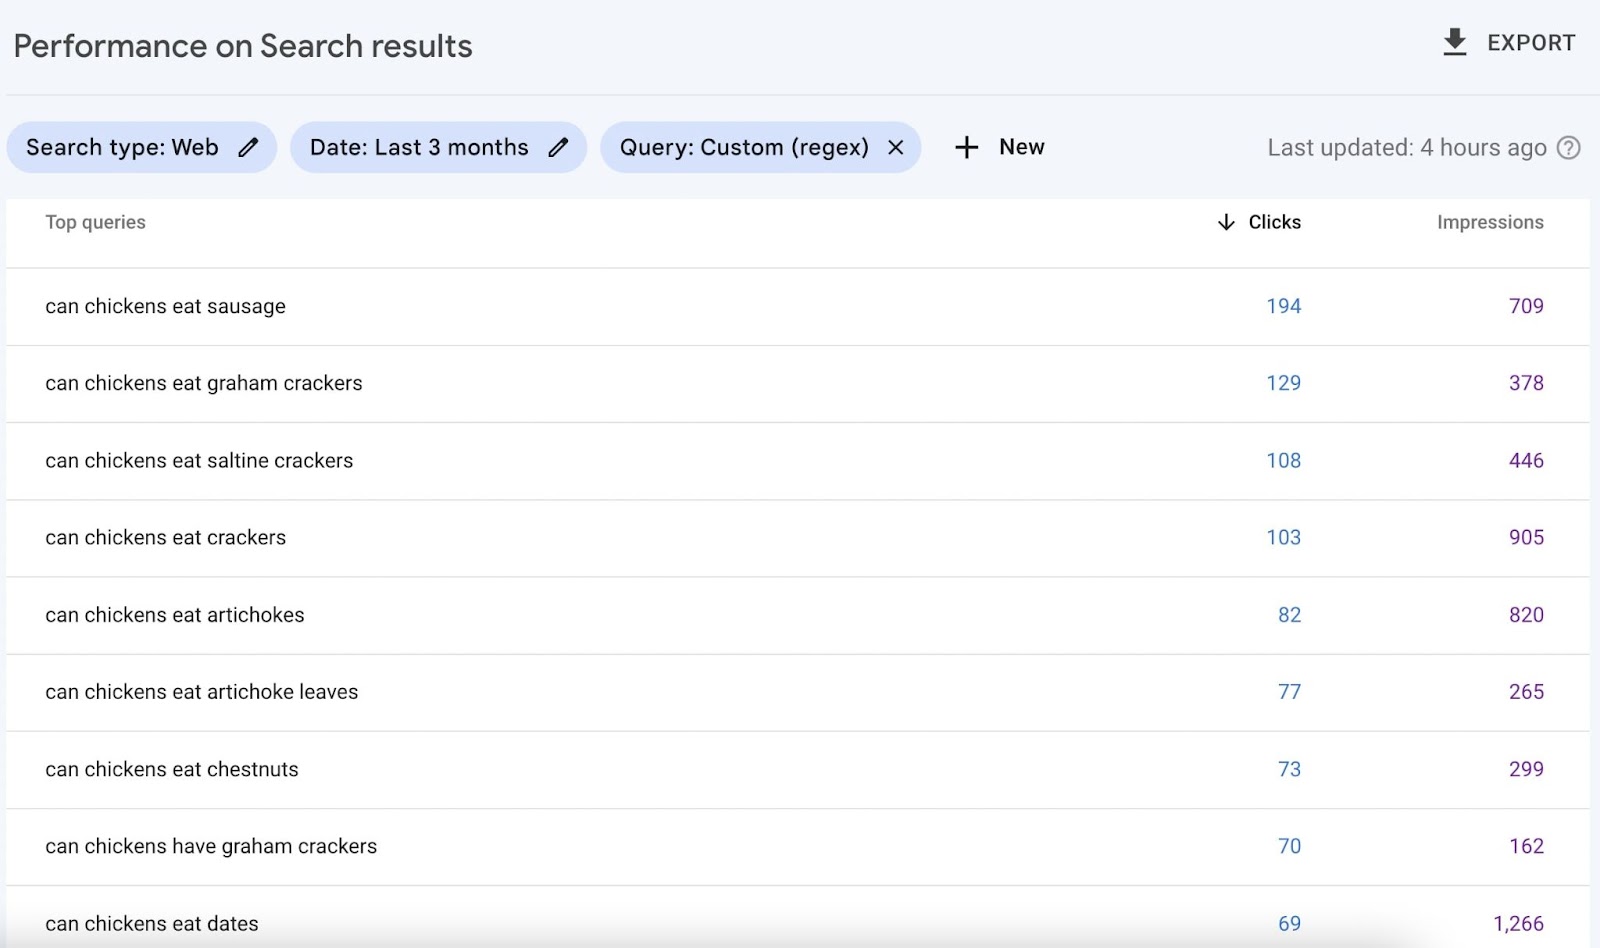 "Performance on Search results" filters page in GSC